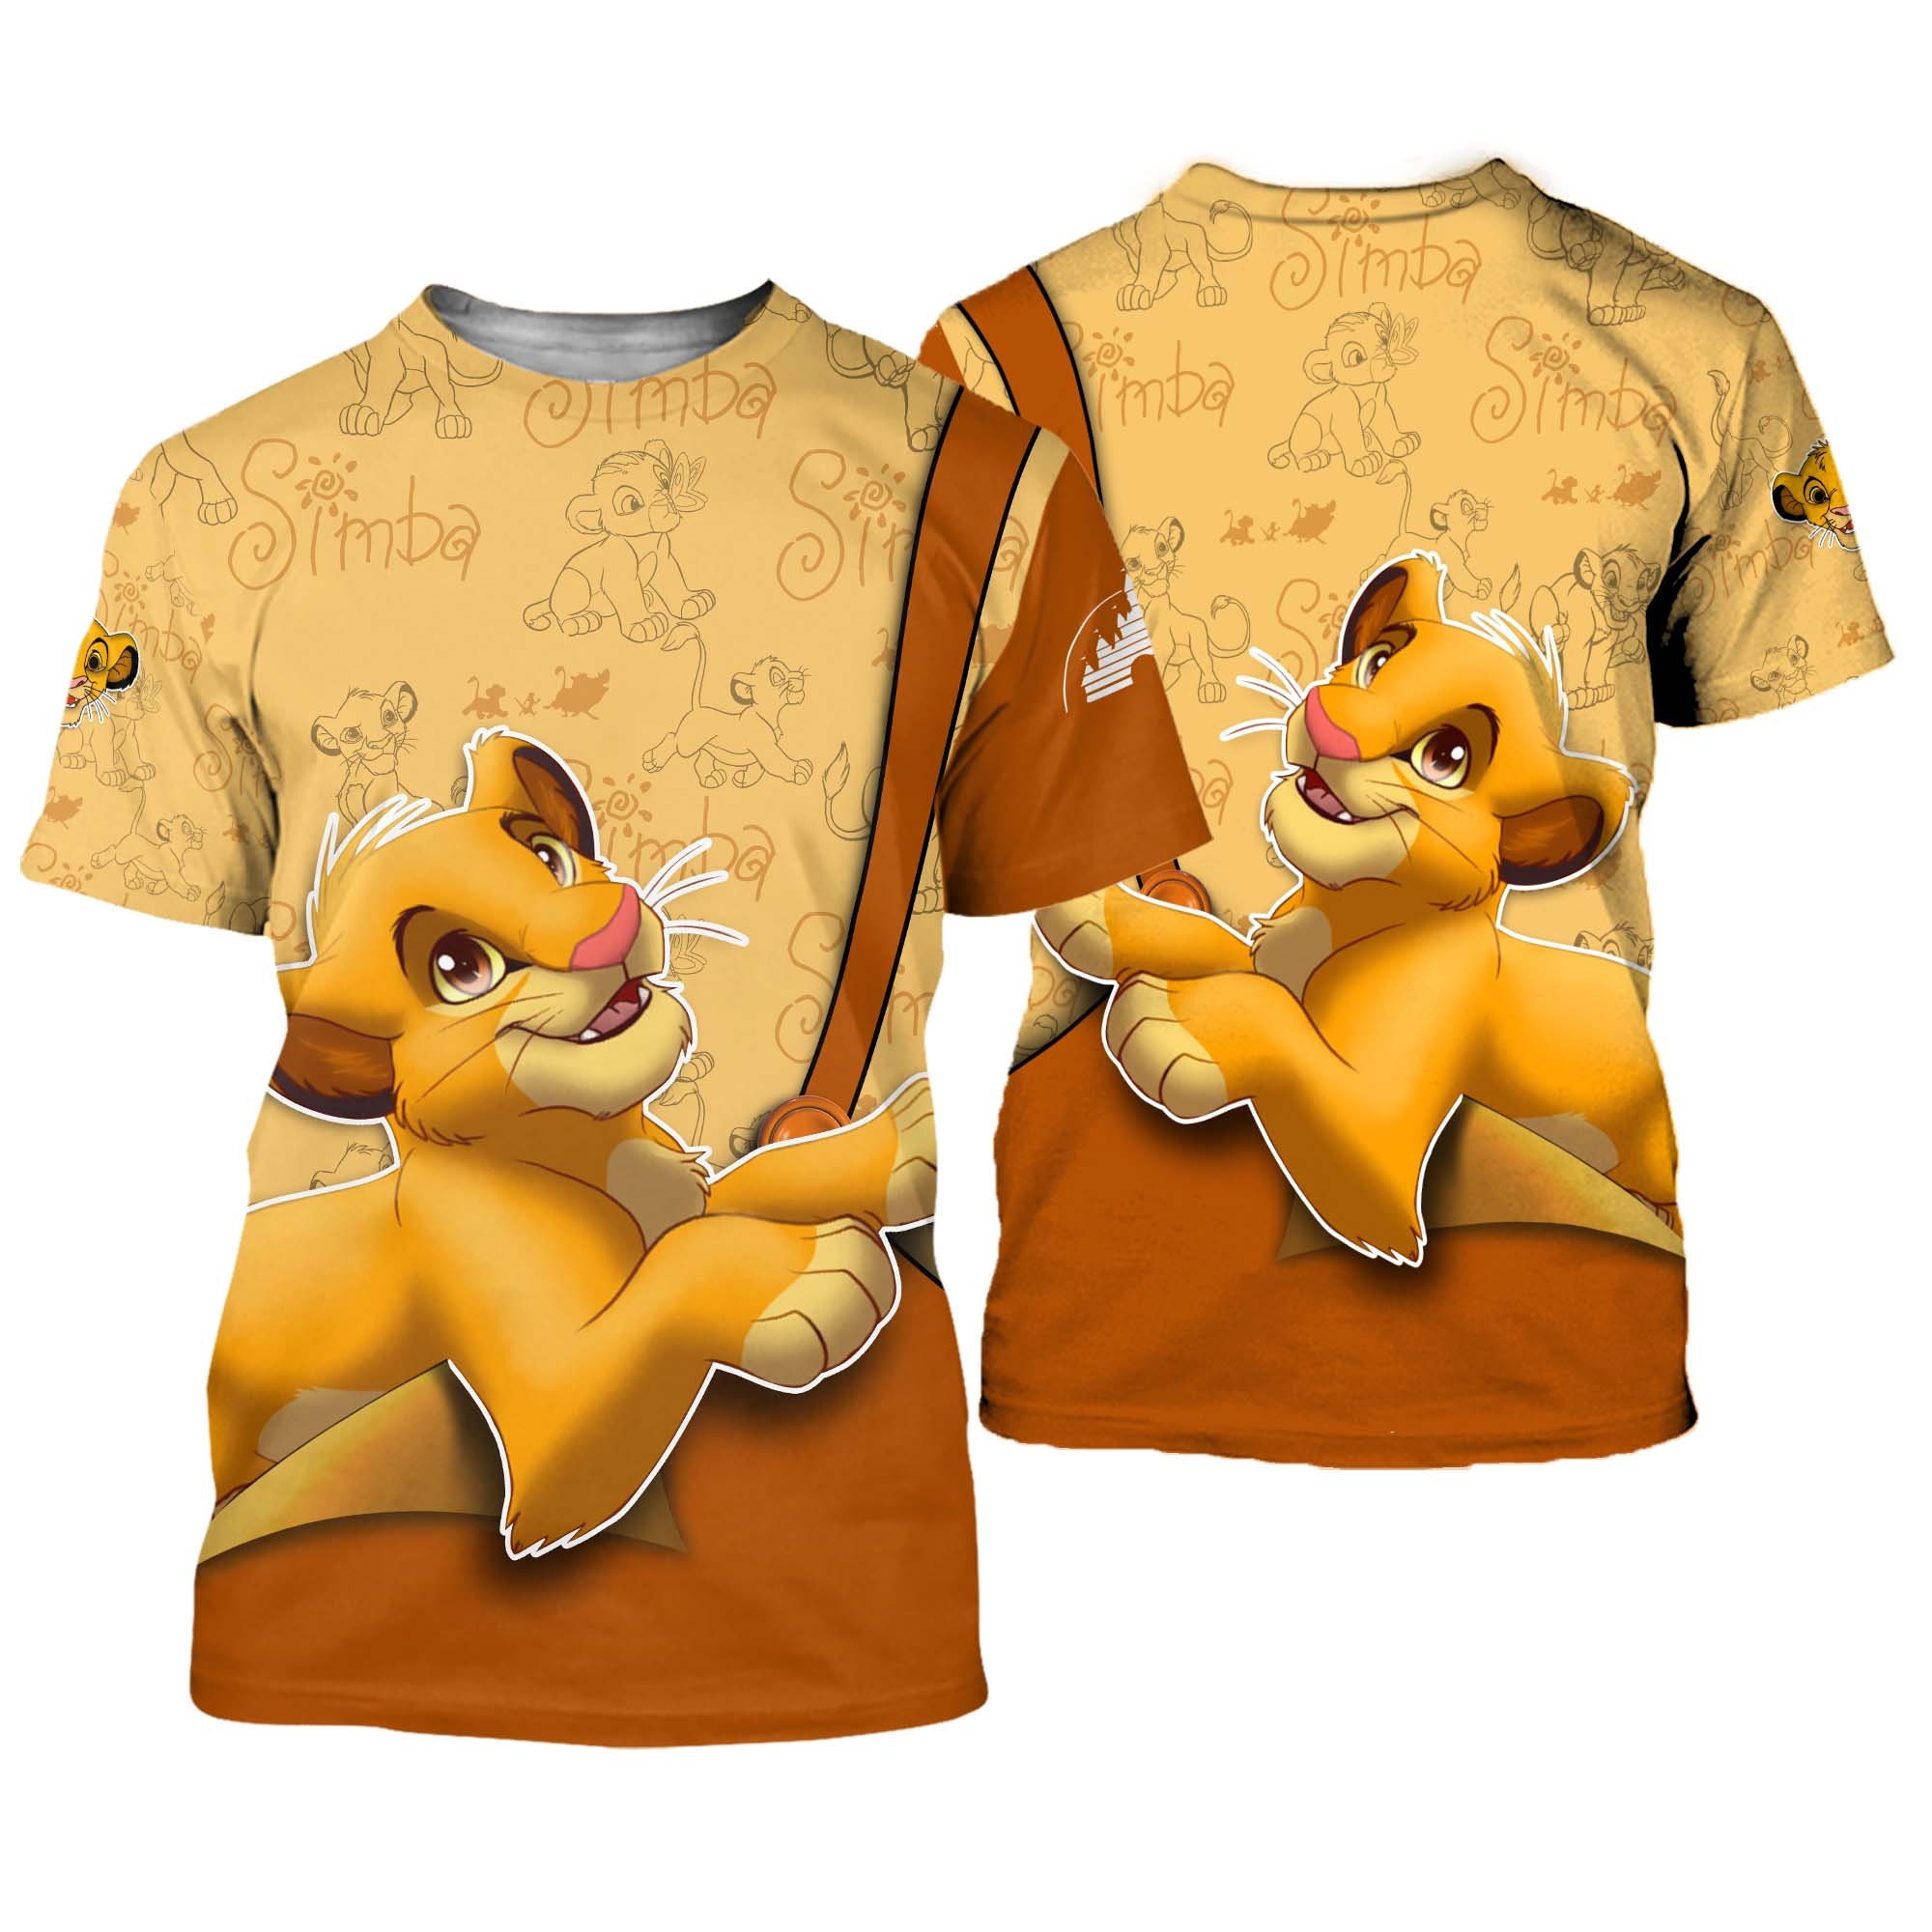 Simba Lion King Orange Button Overalls Patterns Disney Outfits Unisex Casual T-shirts 3D